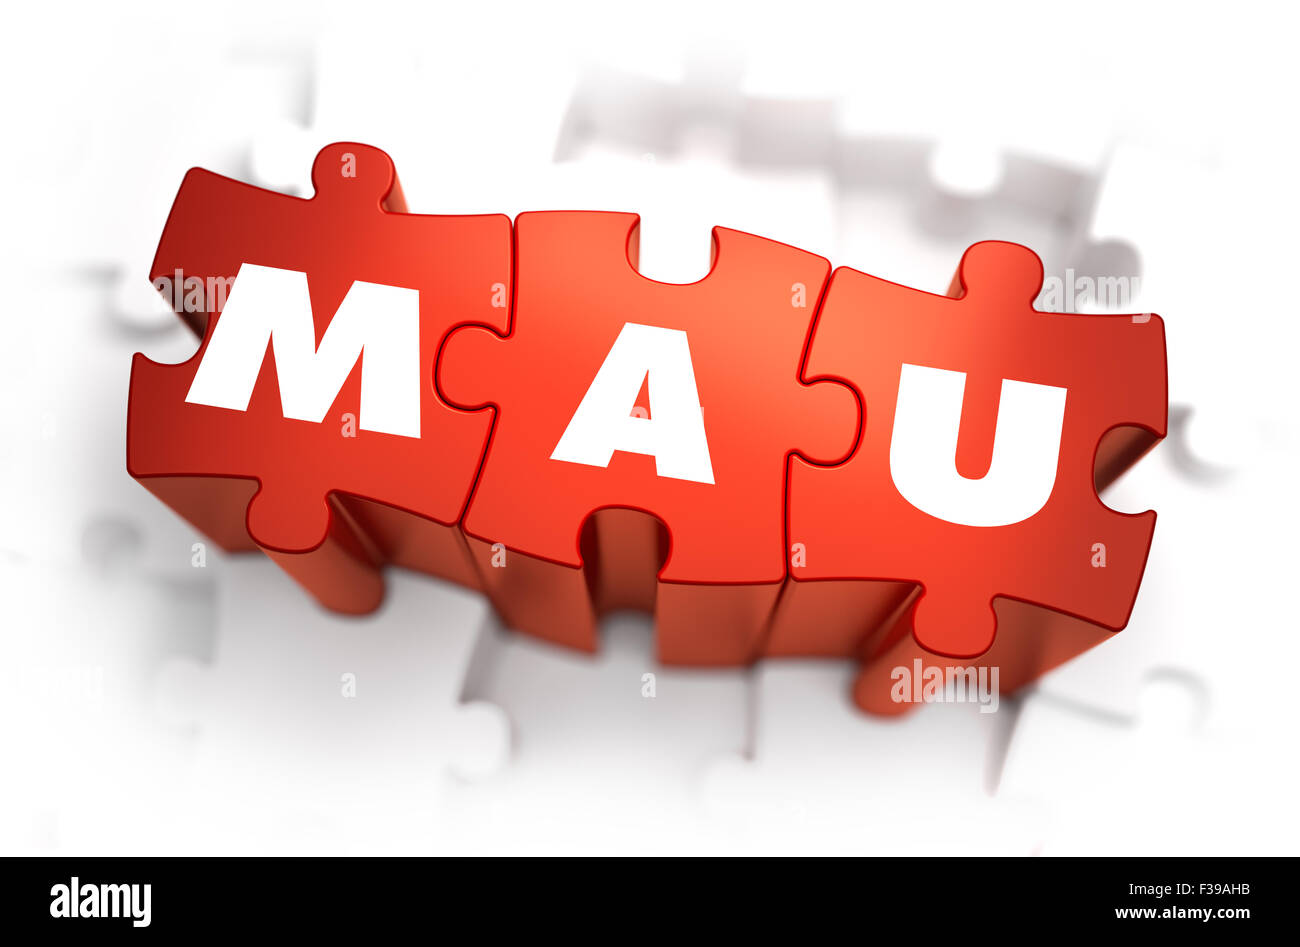 Word - MAU -Monthly Active Users - on Red Puzzles with White Background. 3D Render. Stock Photo